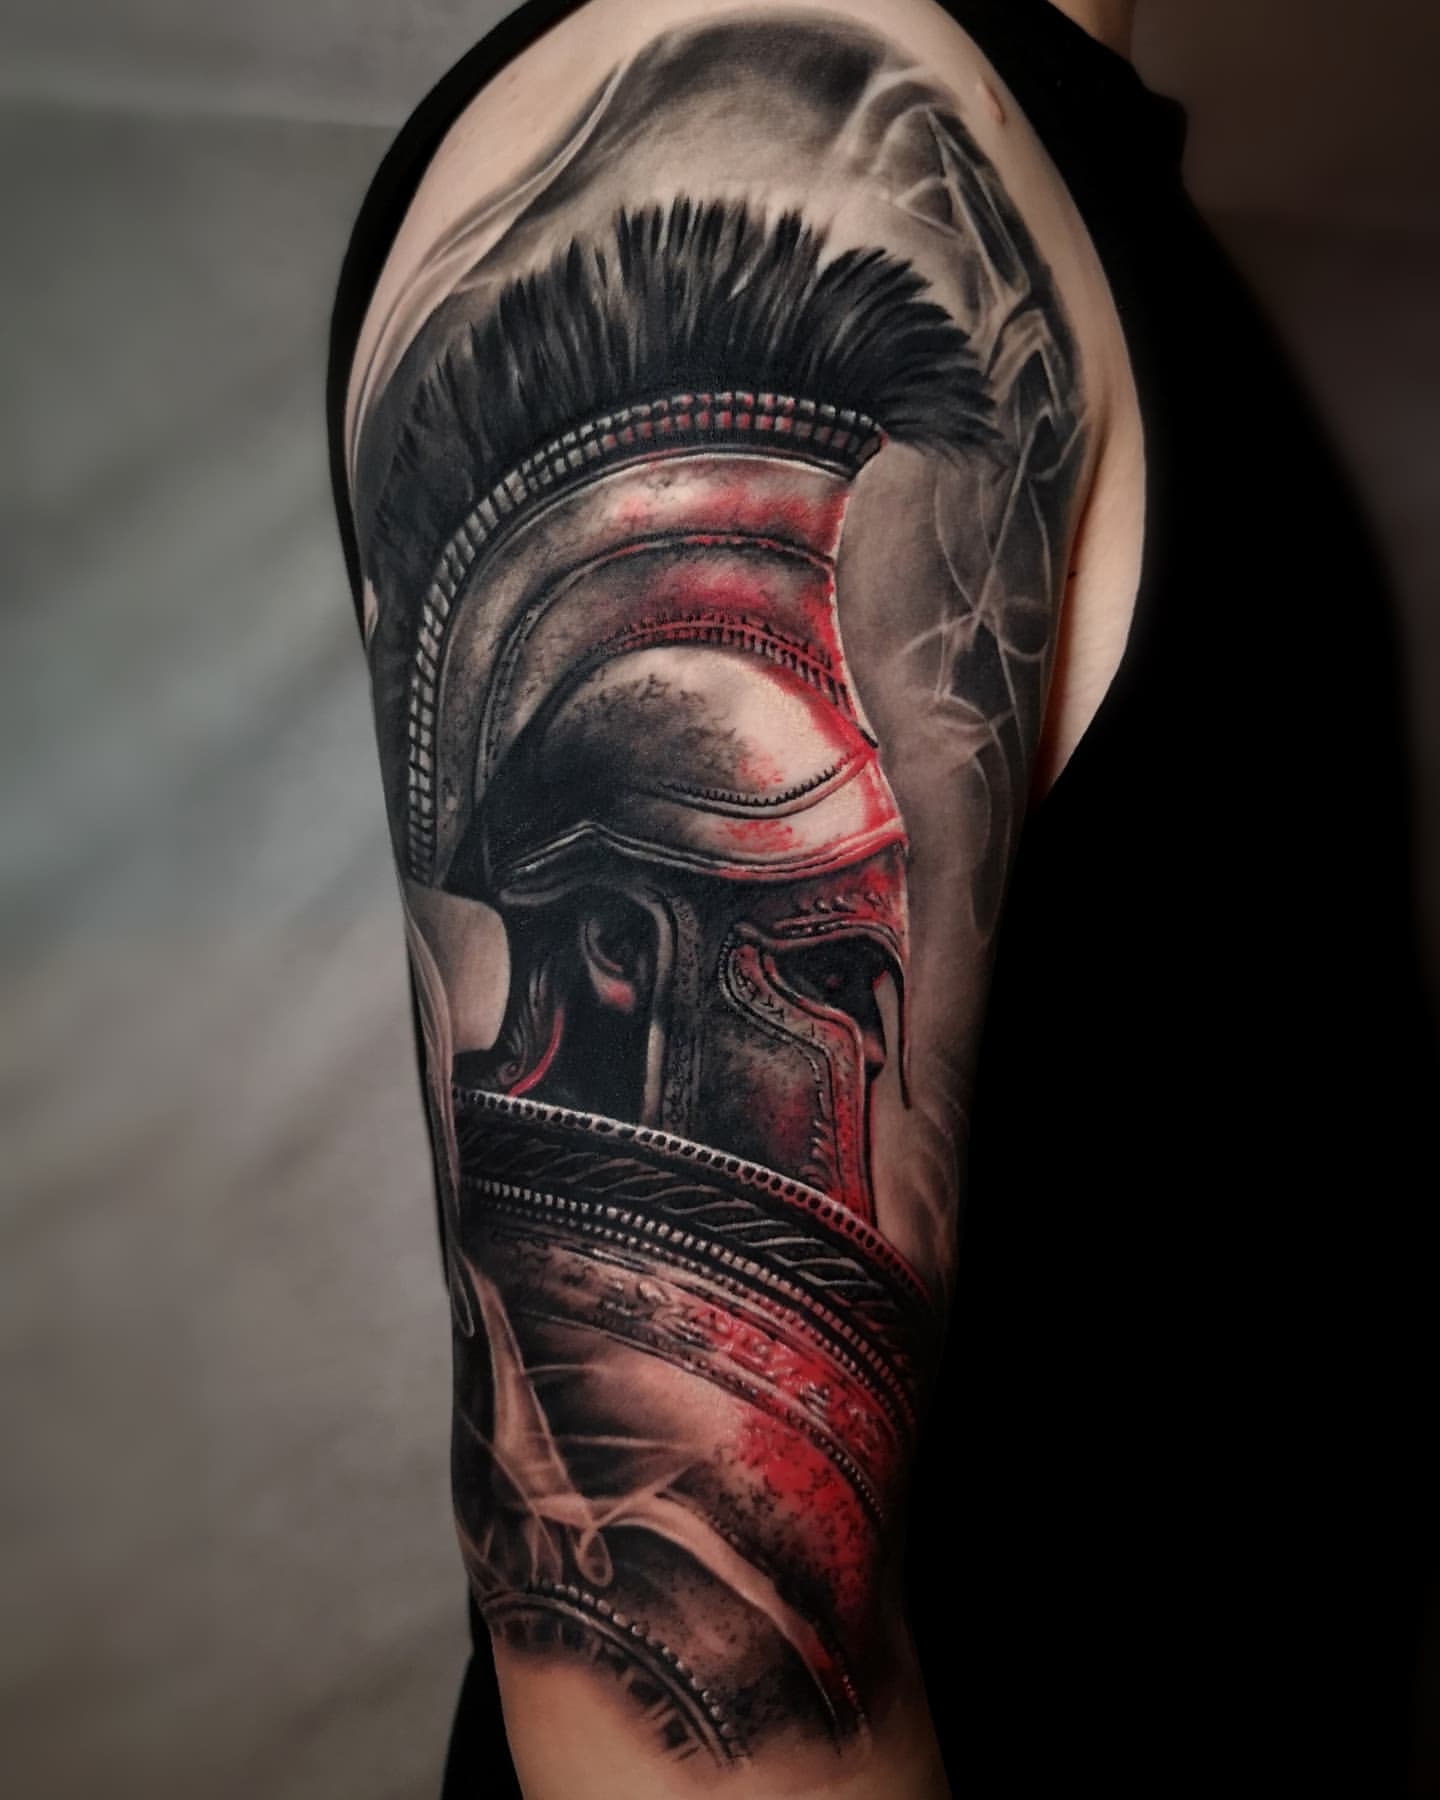 Tattoo uploaded by Mauro Imperatori • Experience the power and strength of  a warrior in this stunning black and gray realism tattoo by the talented  artist Mauro Imperatori. This piece captures the